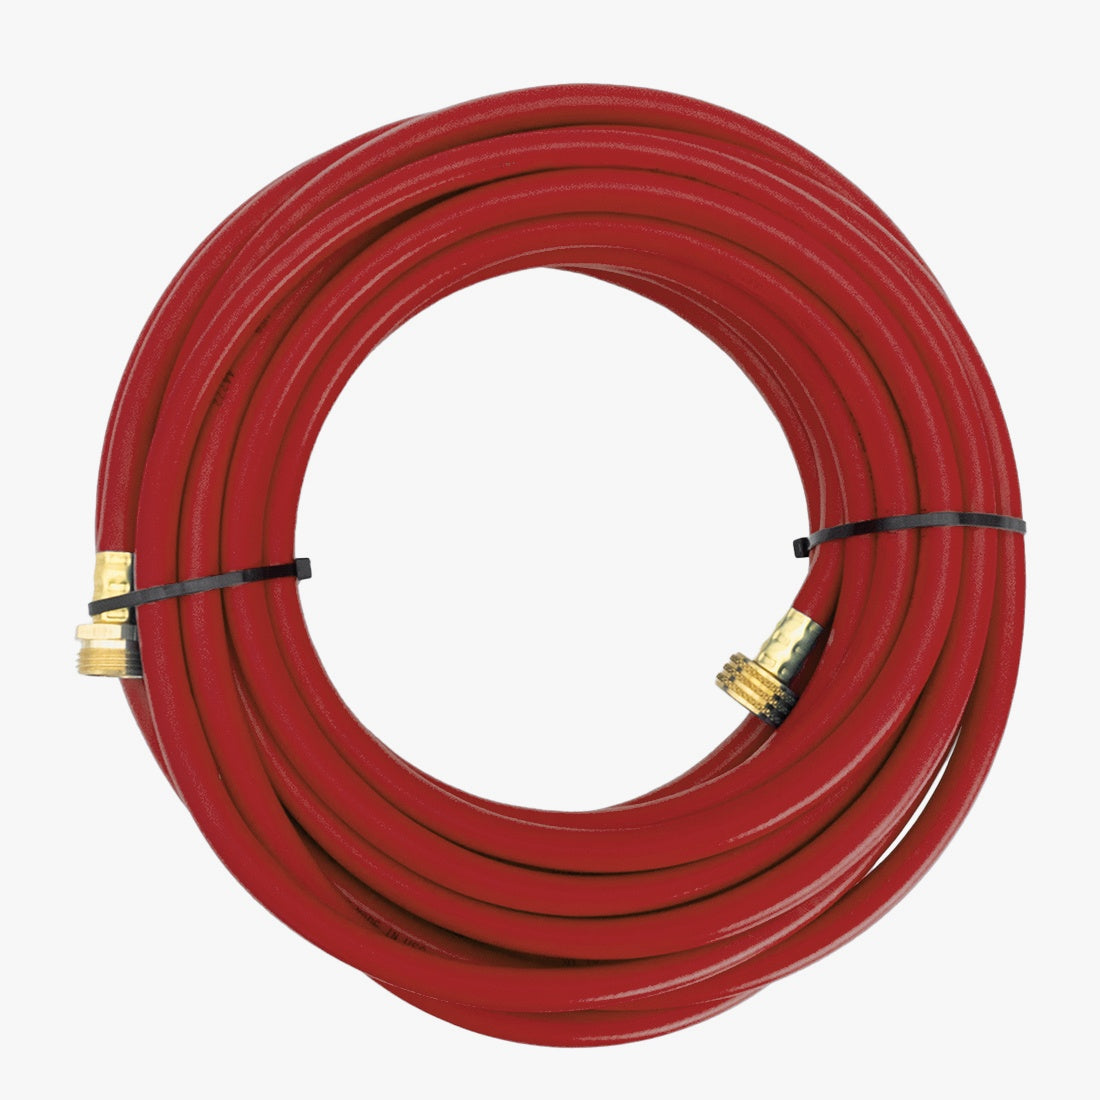 XERO Rubber Hose - 3/8 Inch Red Top View